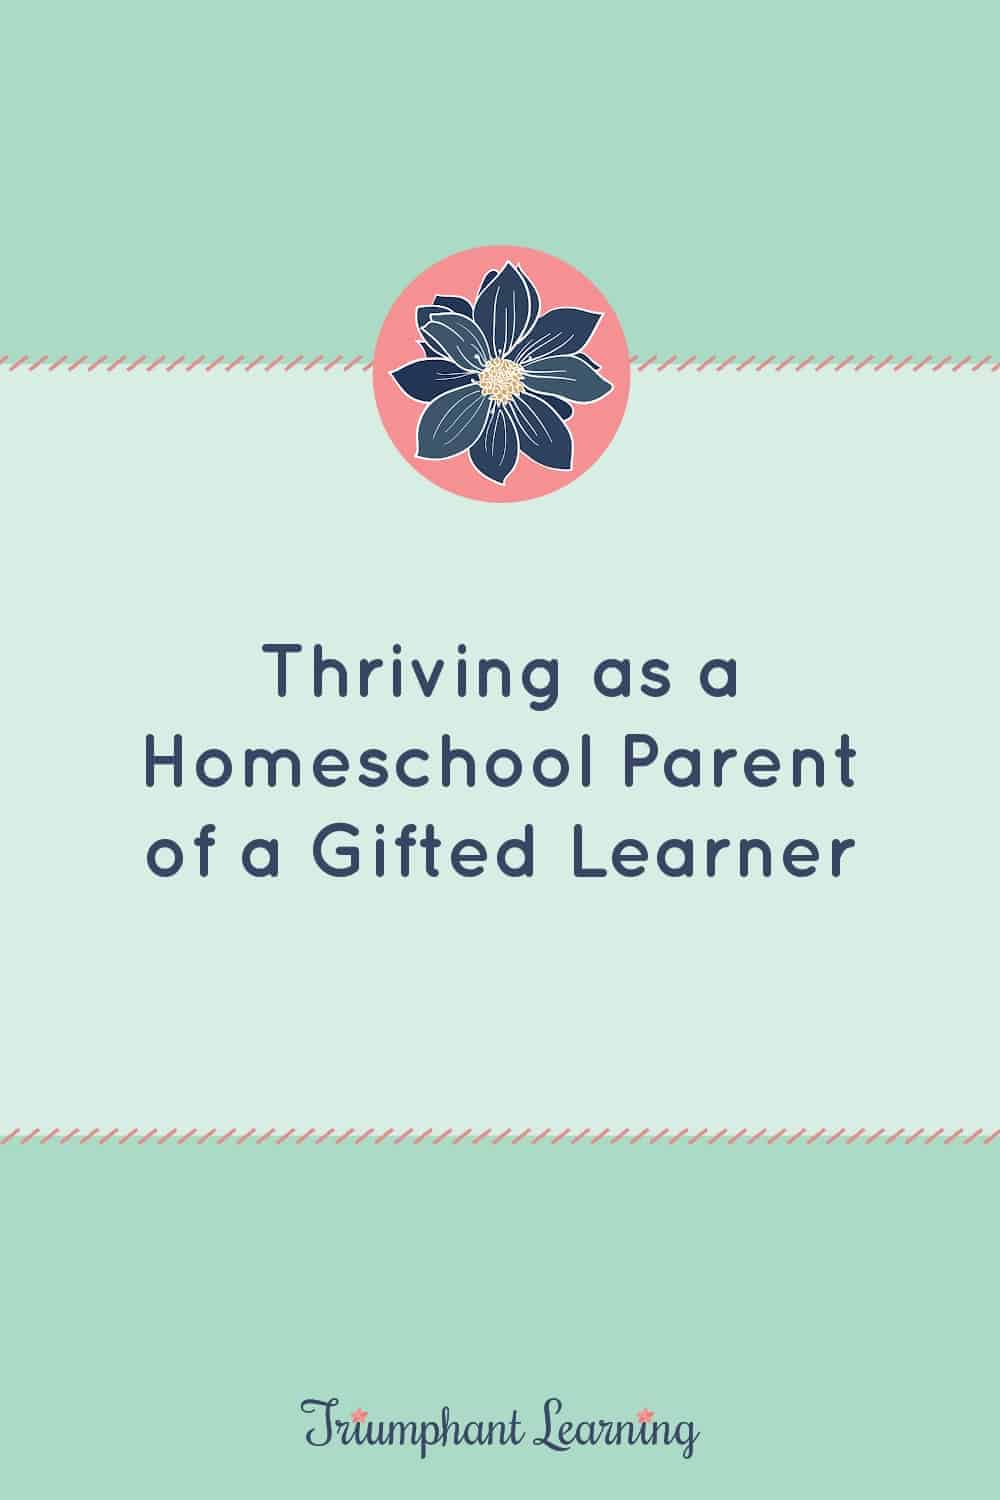 Many gifted students thrive in a homeschool setting. Use these tips to help you and your gifted learner thrive without getting overwhelmed. via @TriLearning